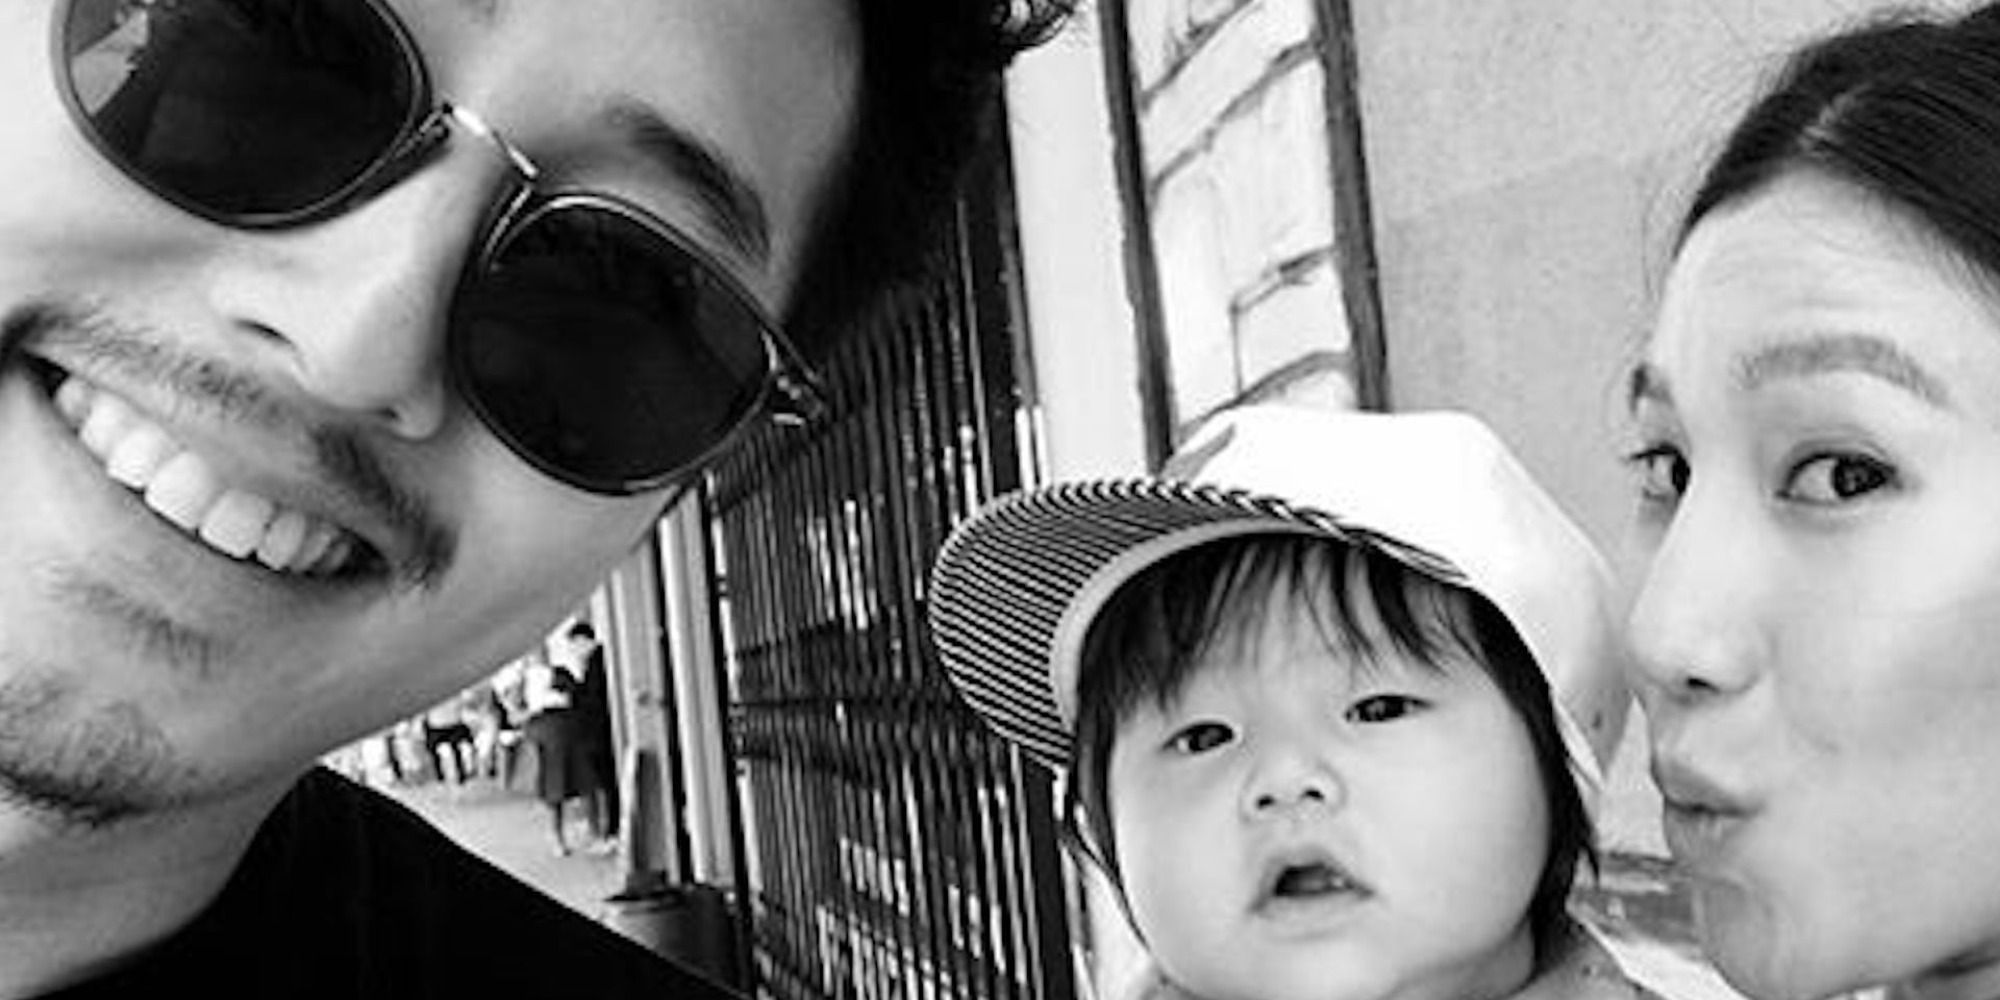 steven yeun of The walking dead poses with wife joana and son jude